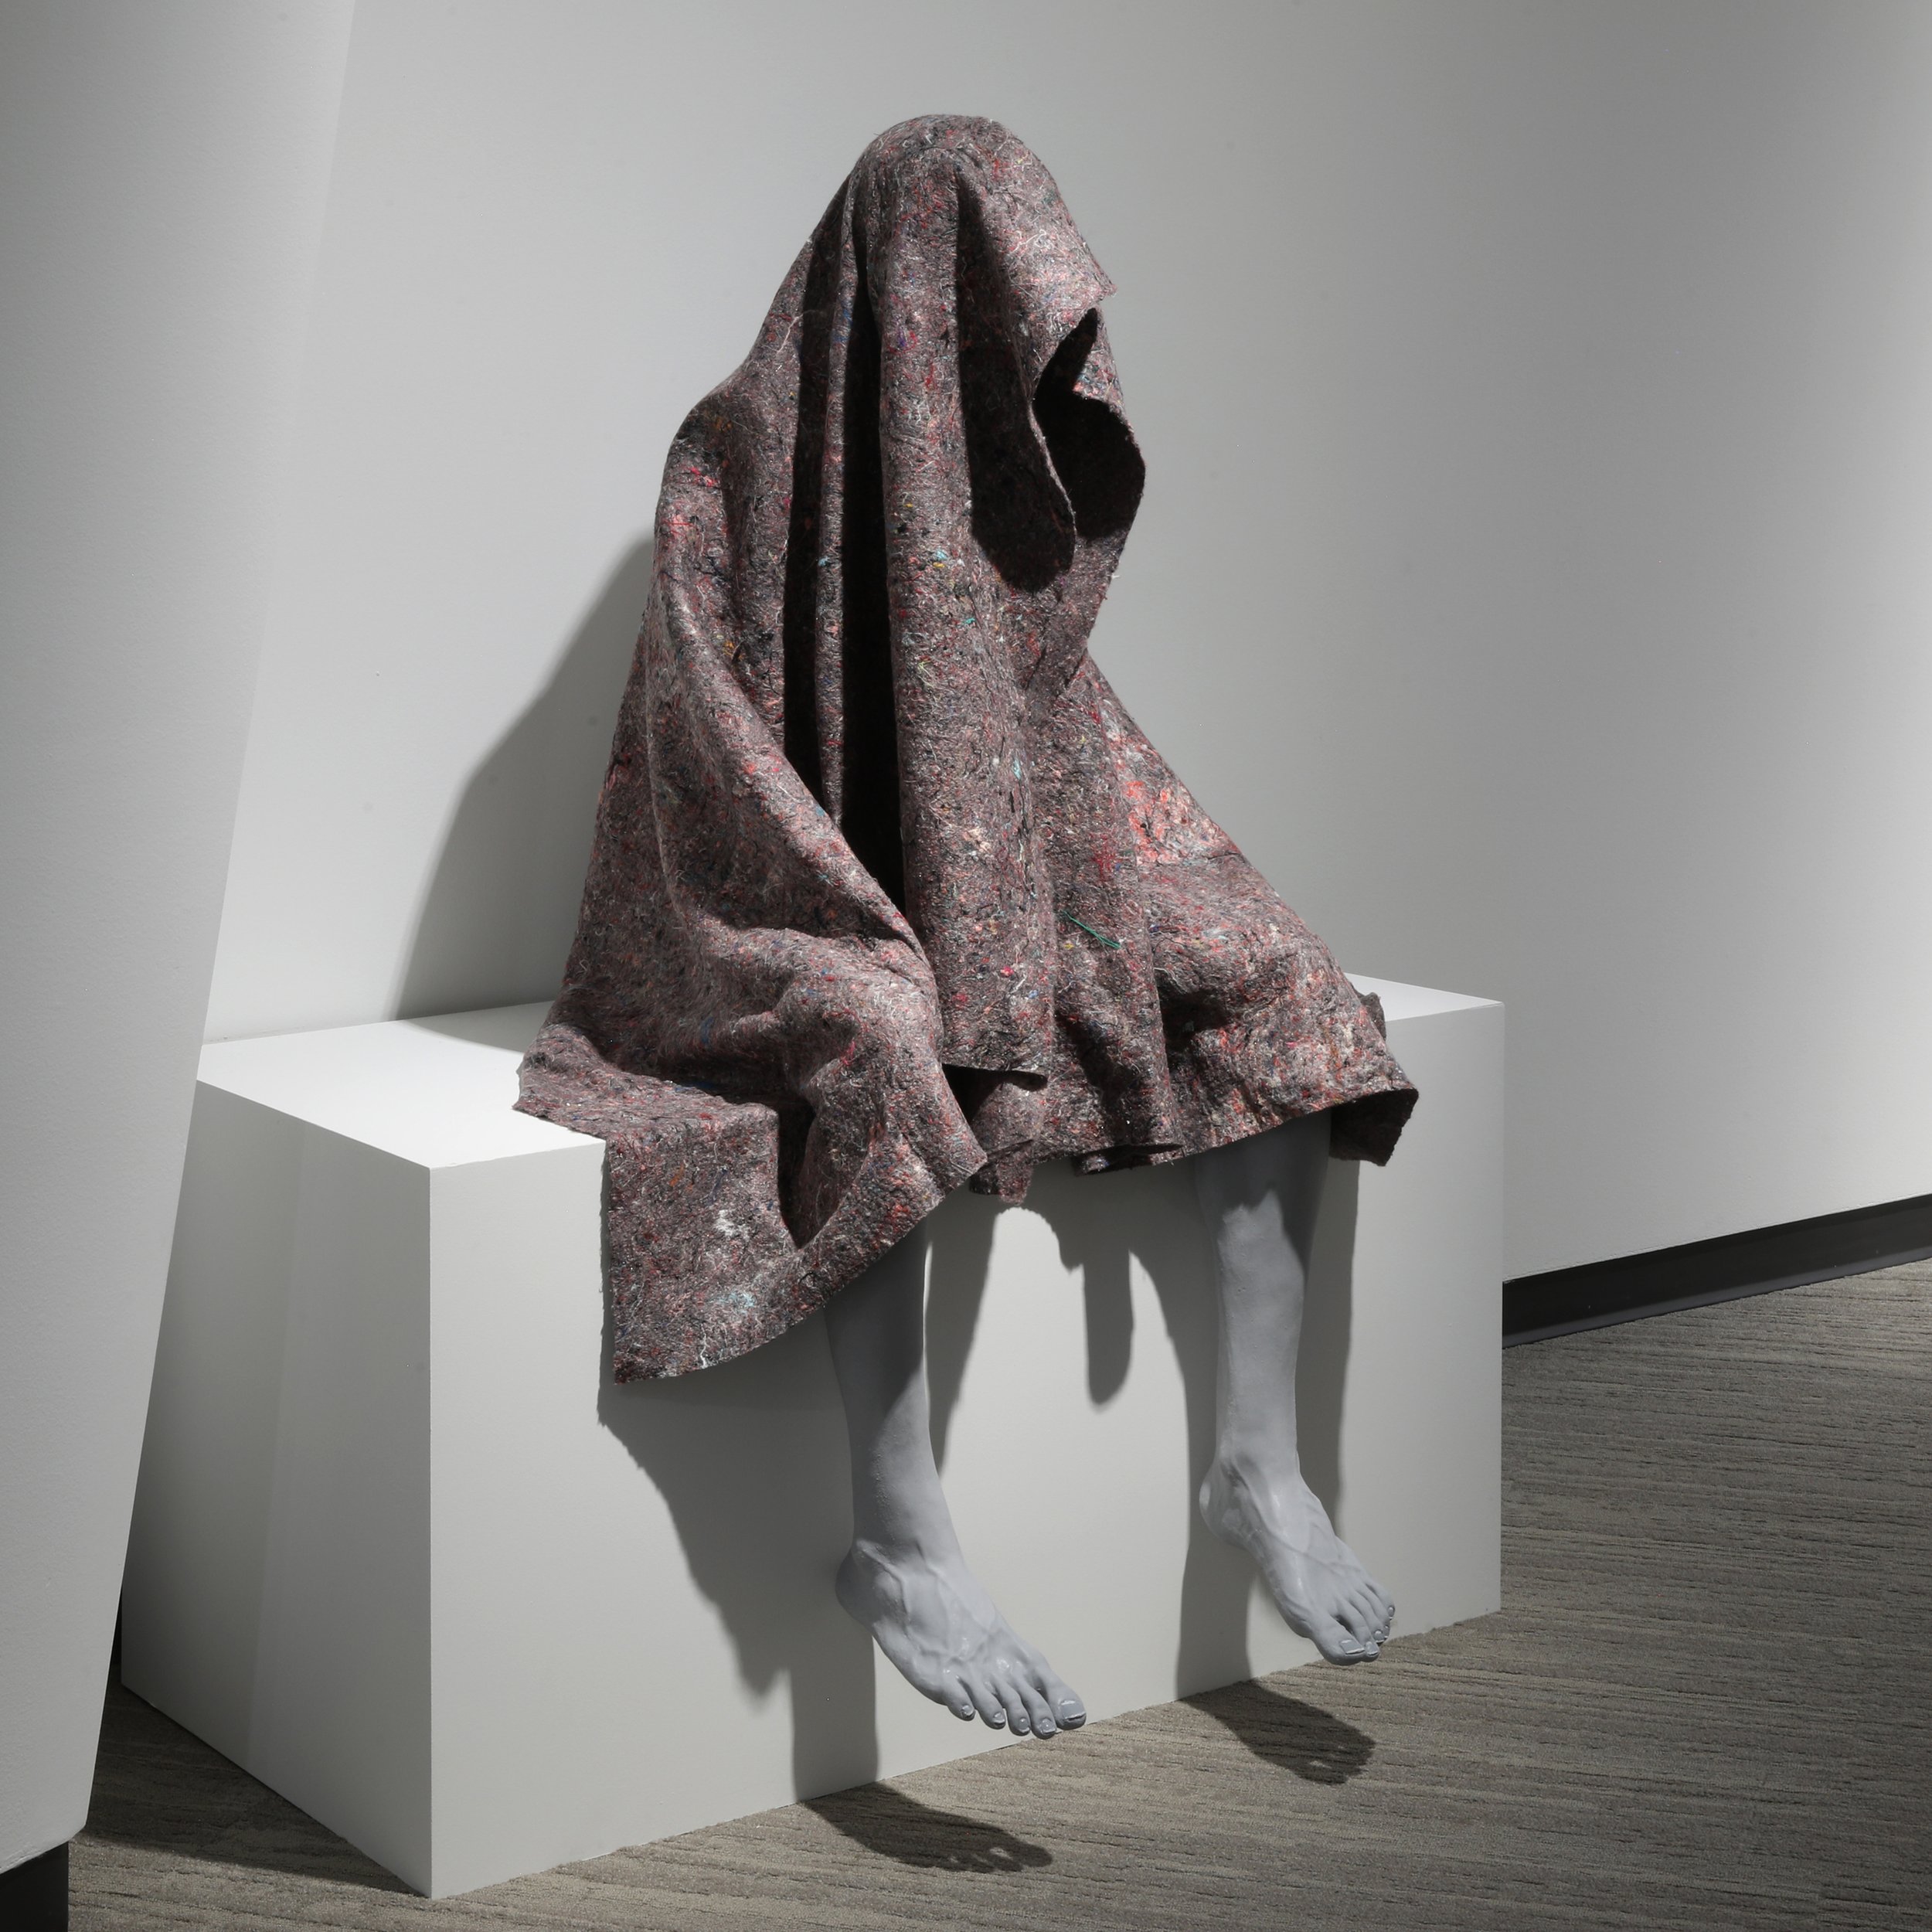   The Ventriloquist  (2019) silicone, resin, fabric 58” x 24” x 36”  Installation view of  That, There, It  at Contemporary Calgary, Canada 